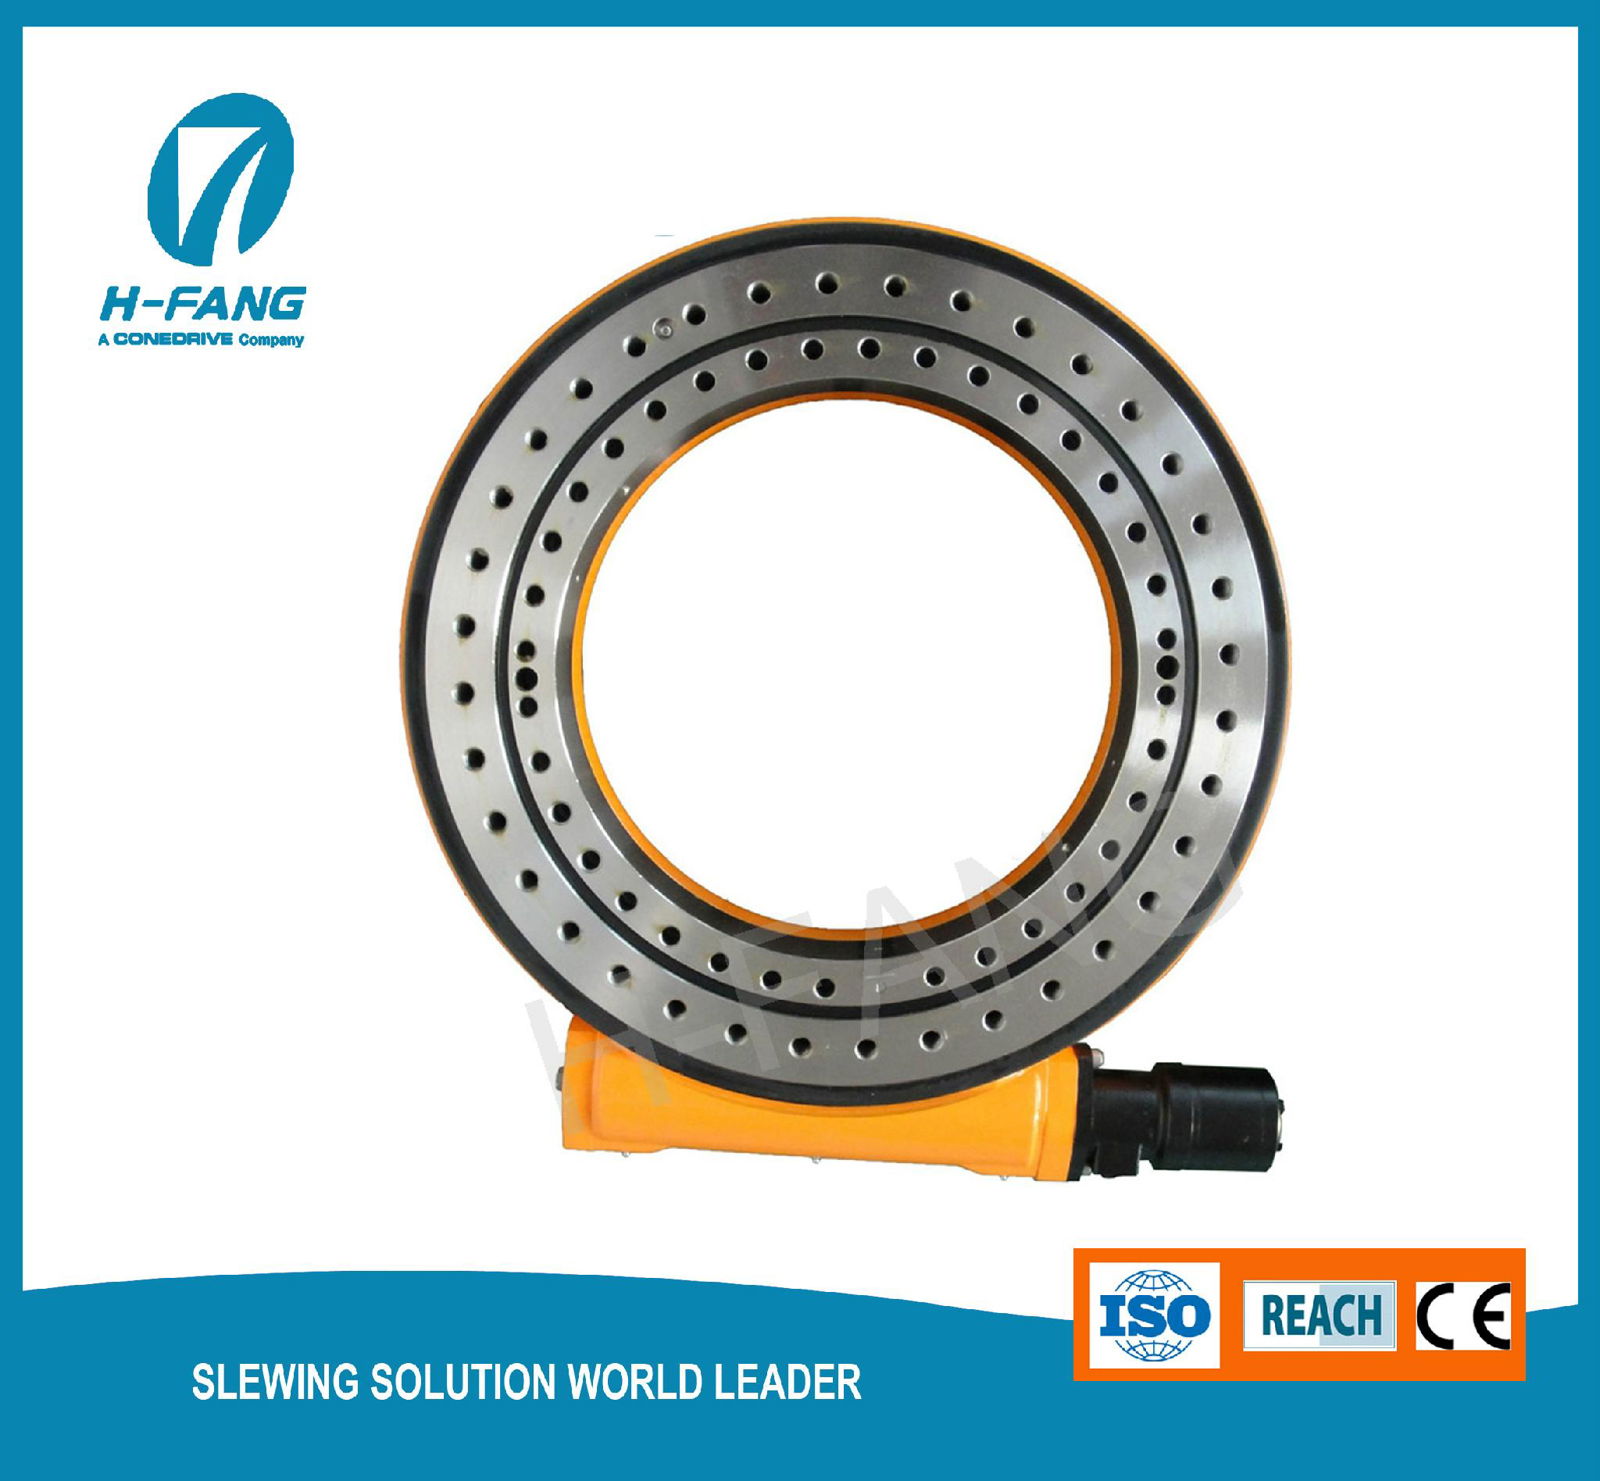 25'' Enclosed Slewing Drive for solar tracking system